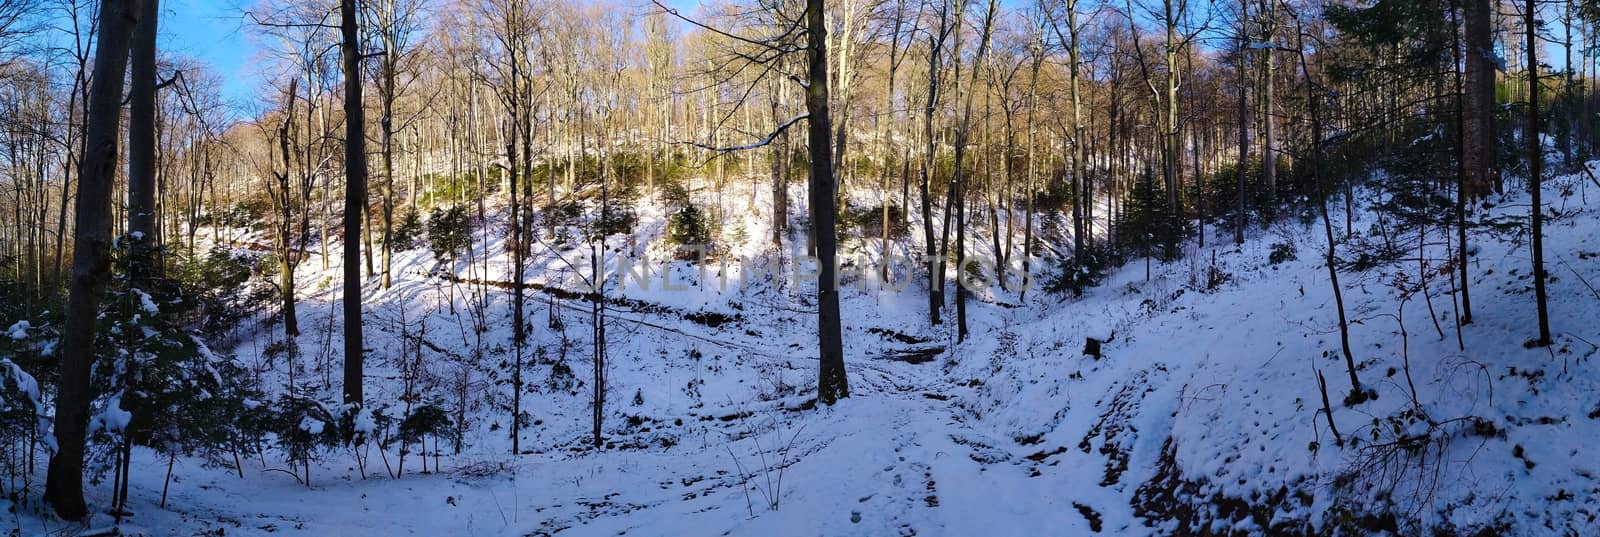 panorama of trees in the forest in winter when the trees are free of leaves. by mahirrov